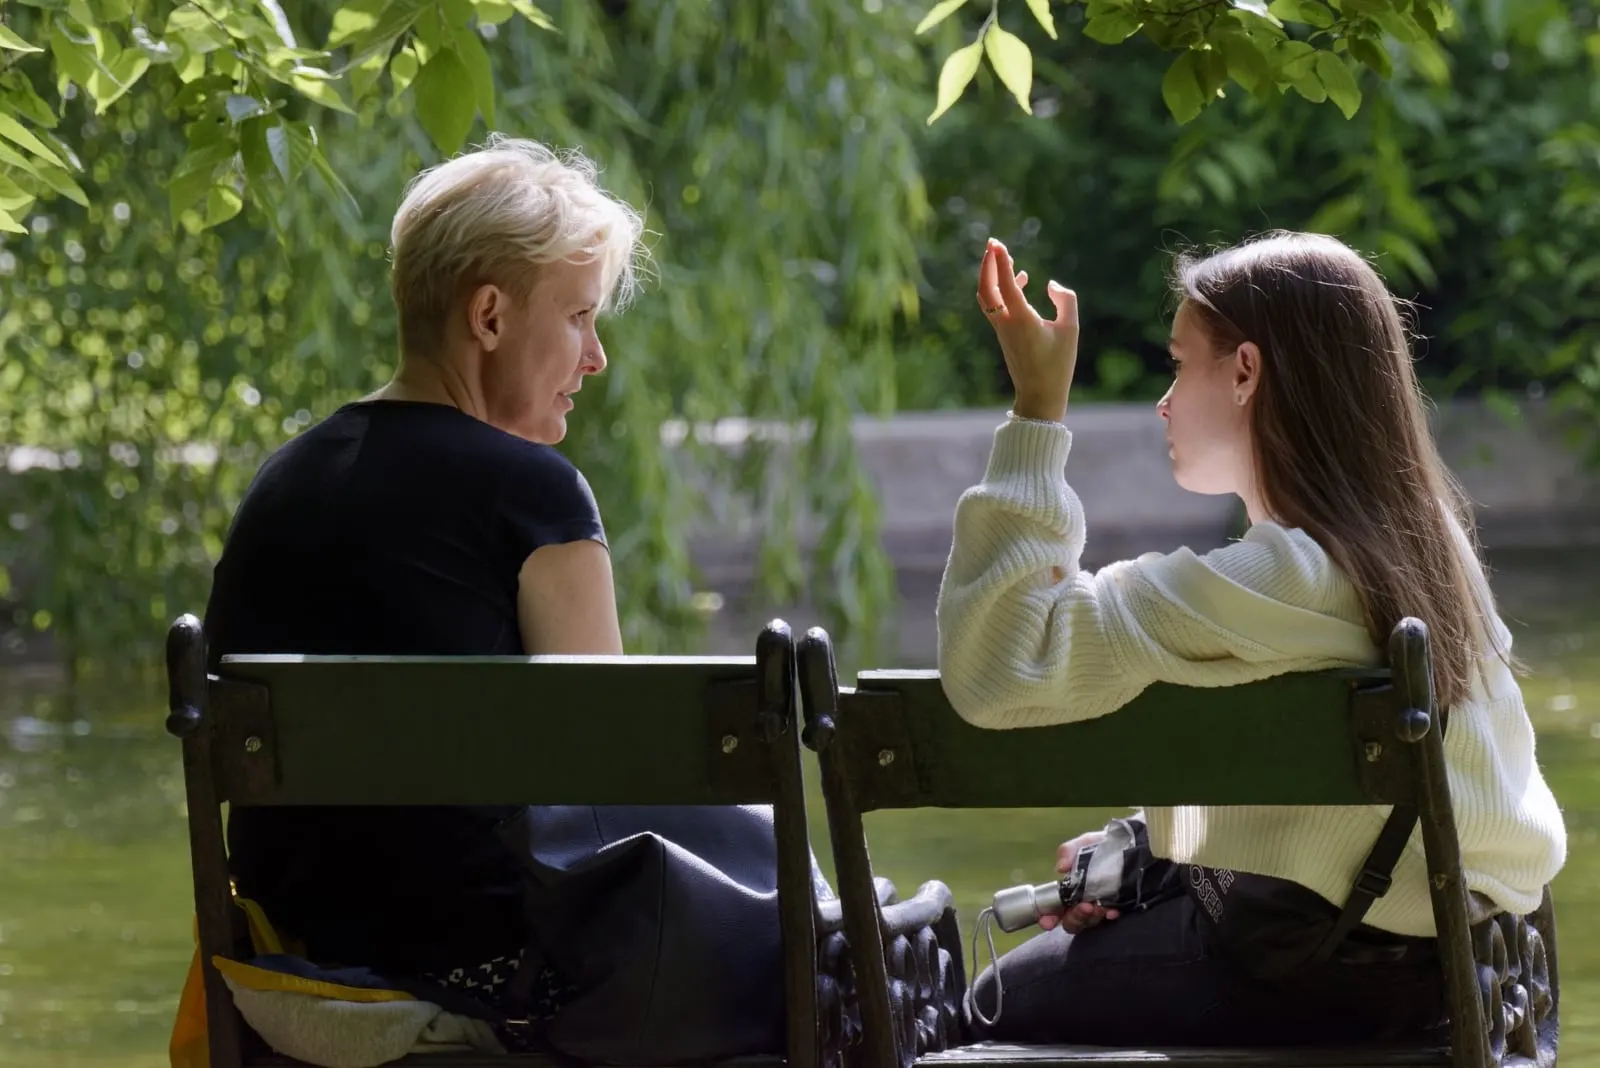 daughter talking to mother while sitting on bench